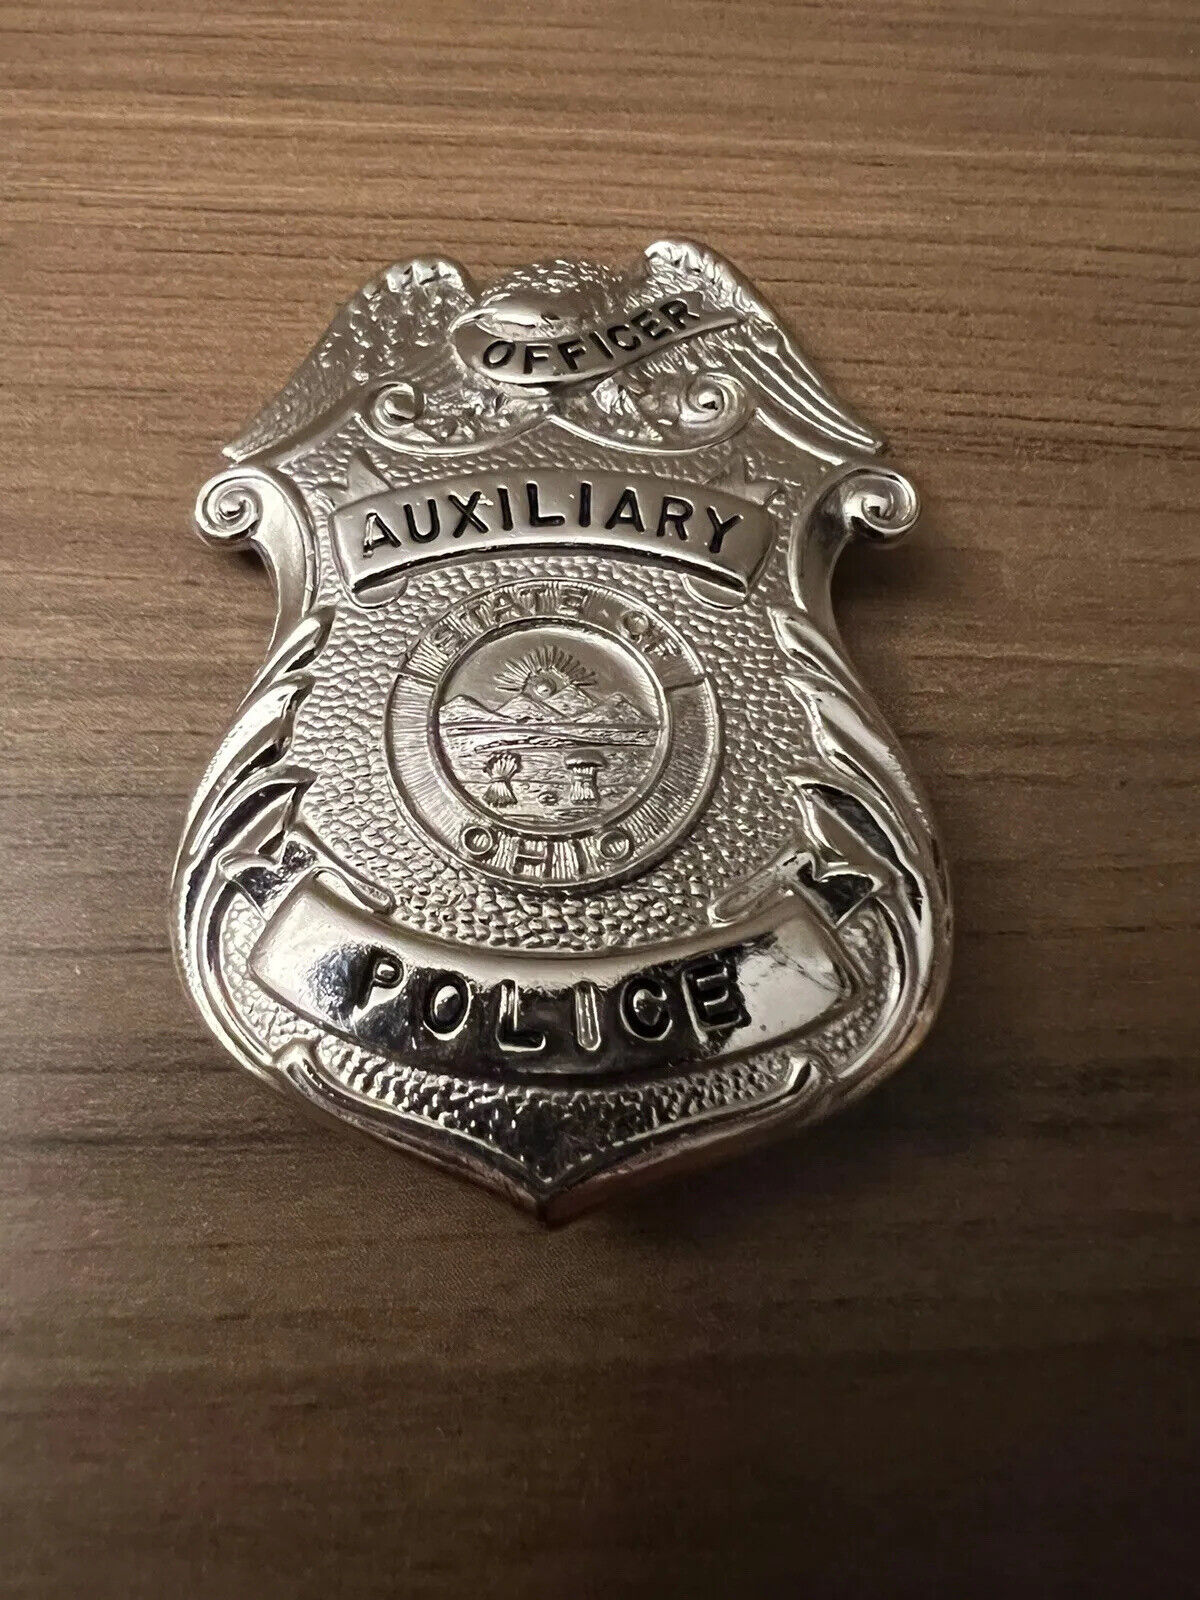 Vintage Ohio Auxiliary Police Badge Obsolete 1960s Smaller Size